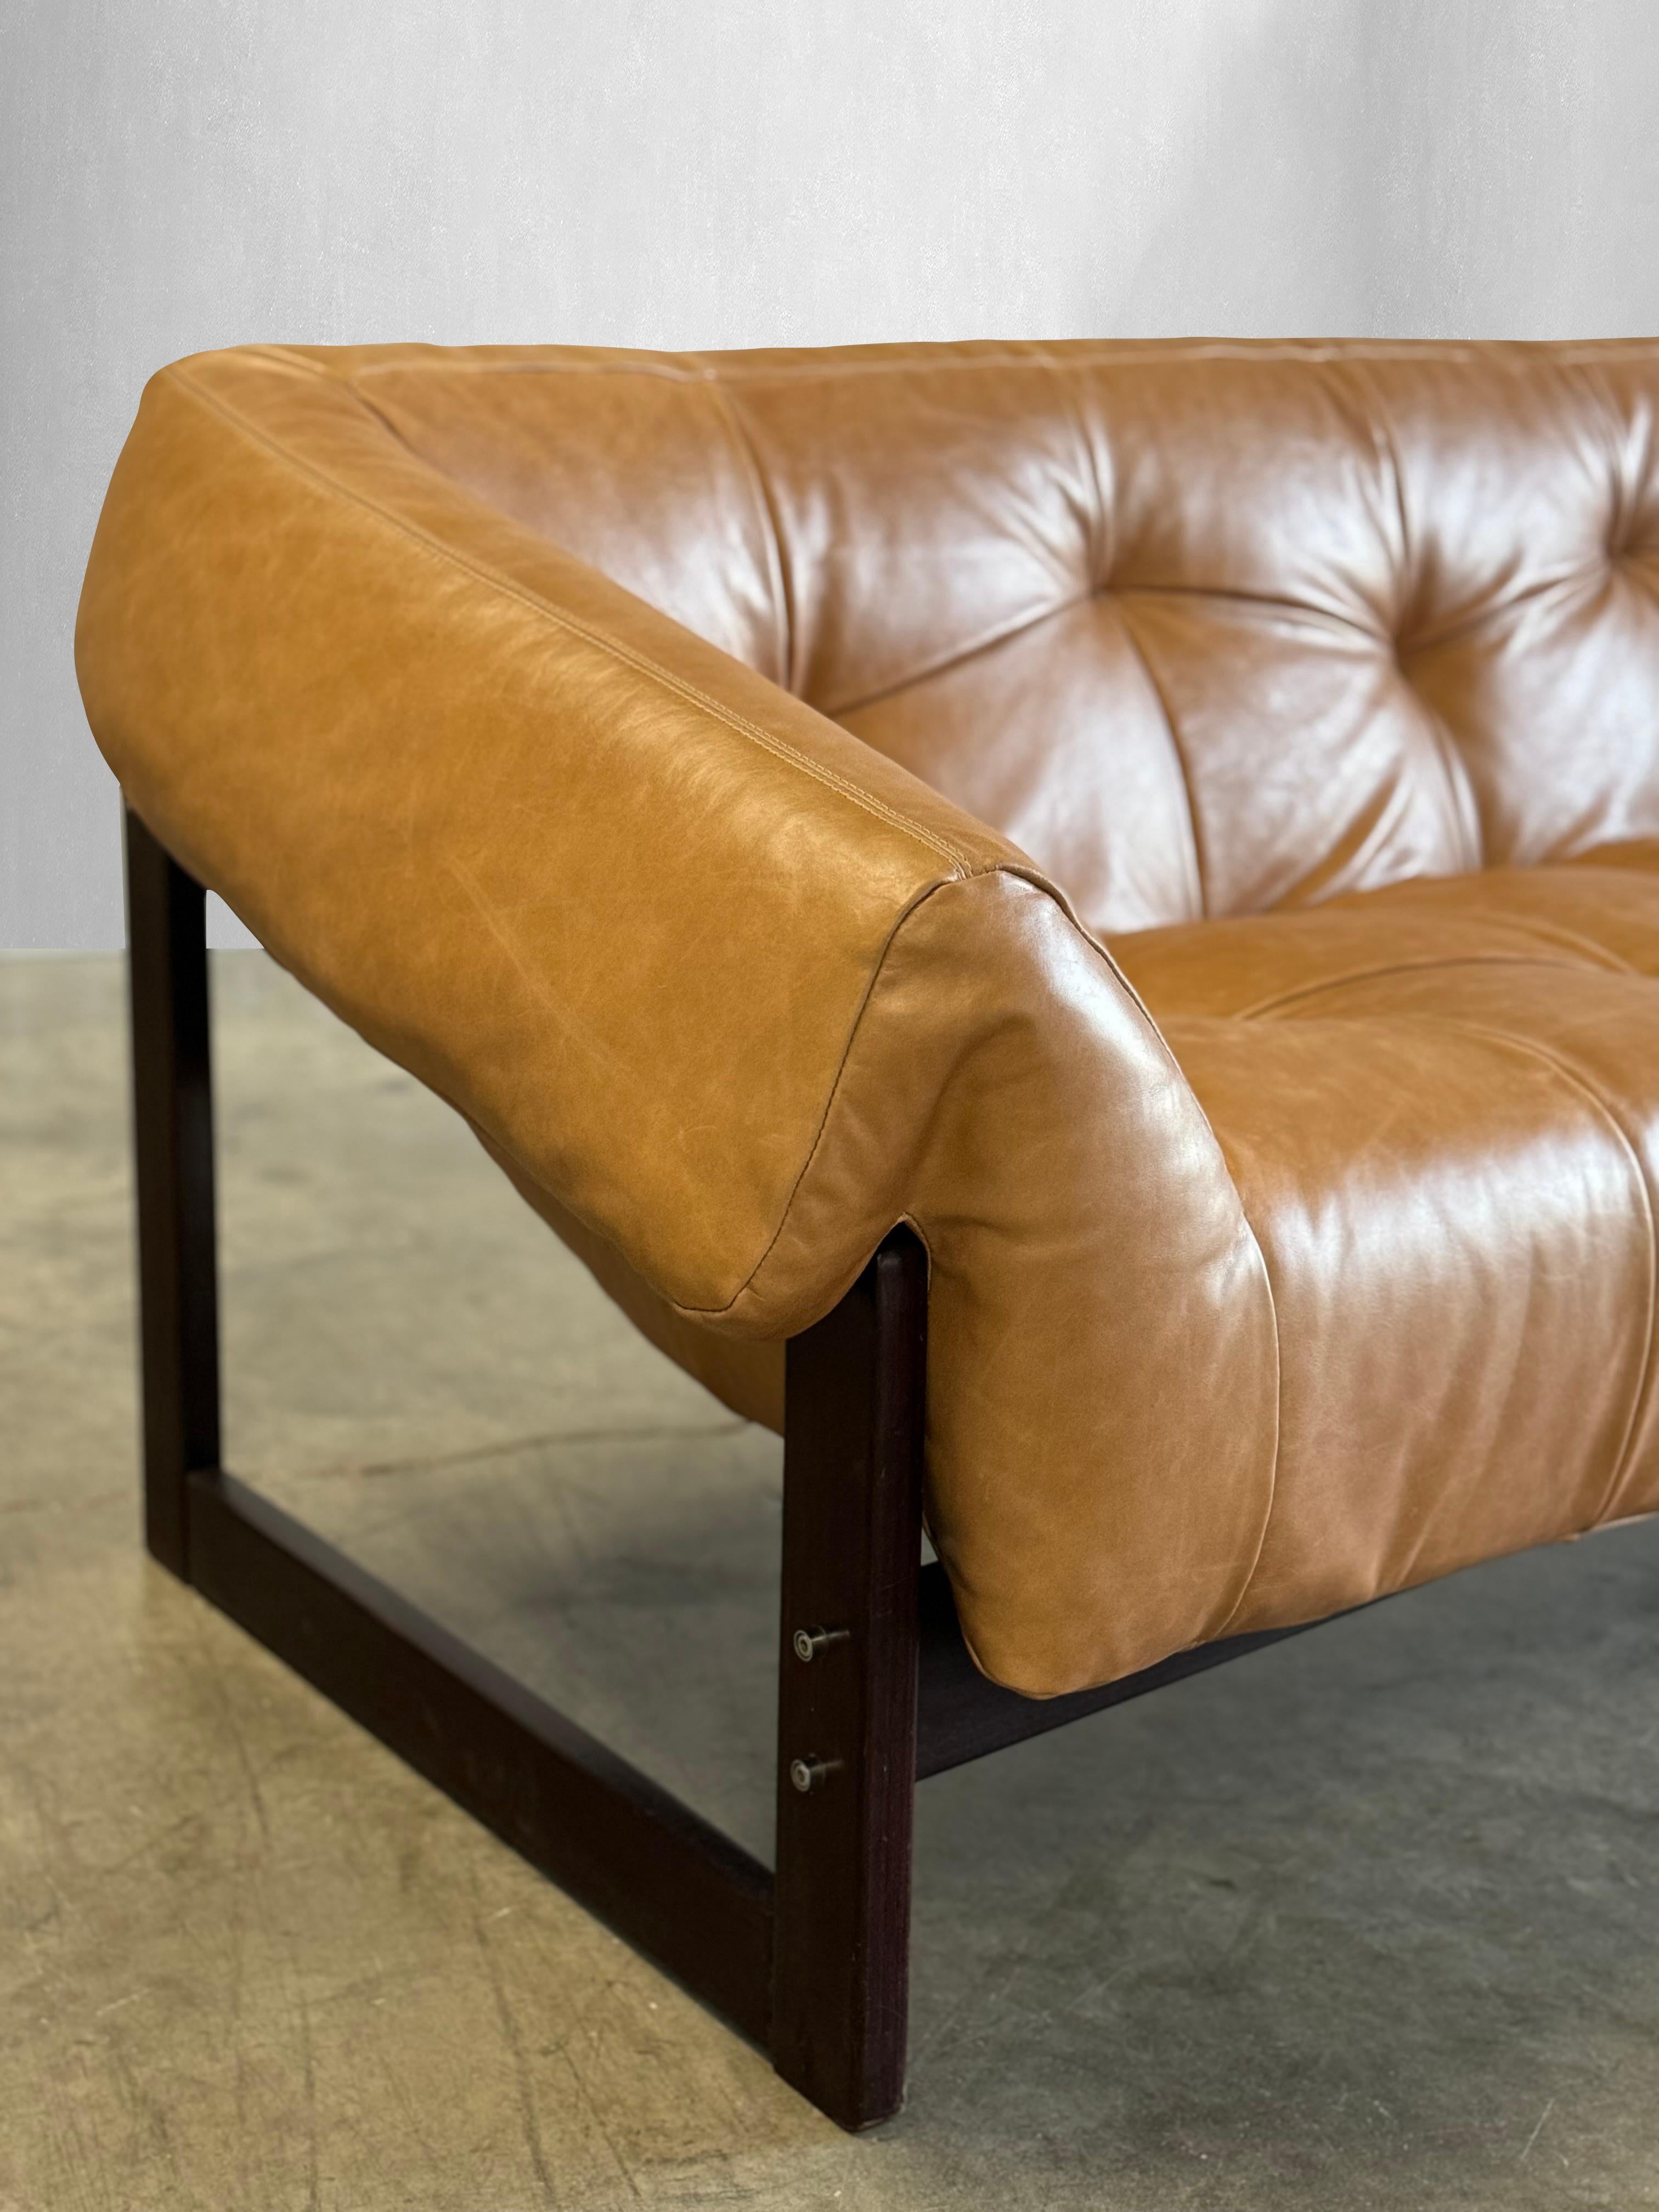 Leather Percival Lafer MP-79 Sofa For Sale